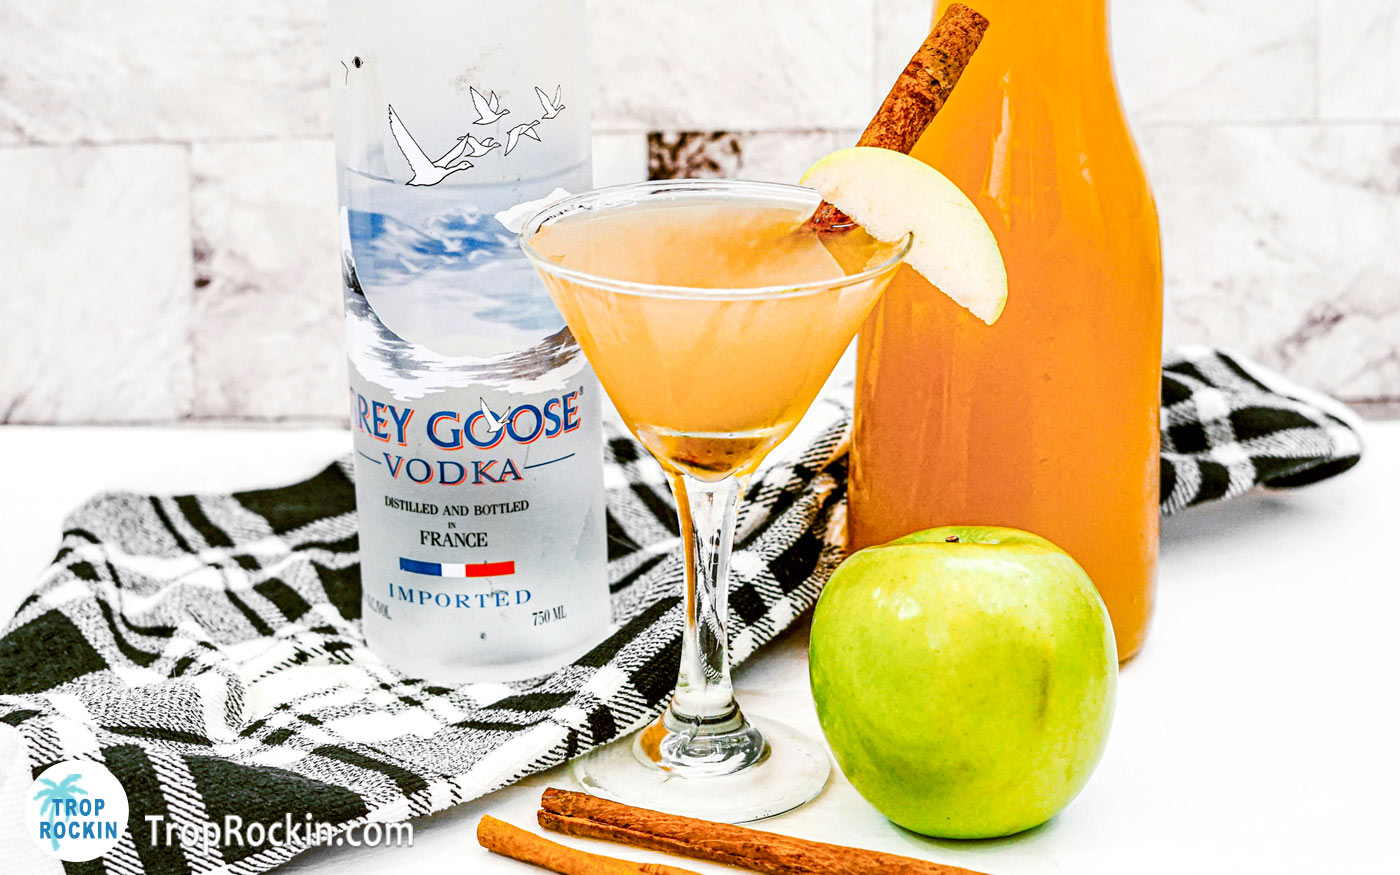 Apple Cider Martini with a fresh slice of apple and a cinnamon stick for garnish. Grey Goose Vodka bottle and caraft of apple cider in background.